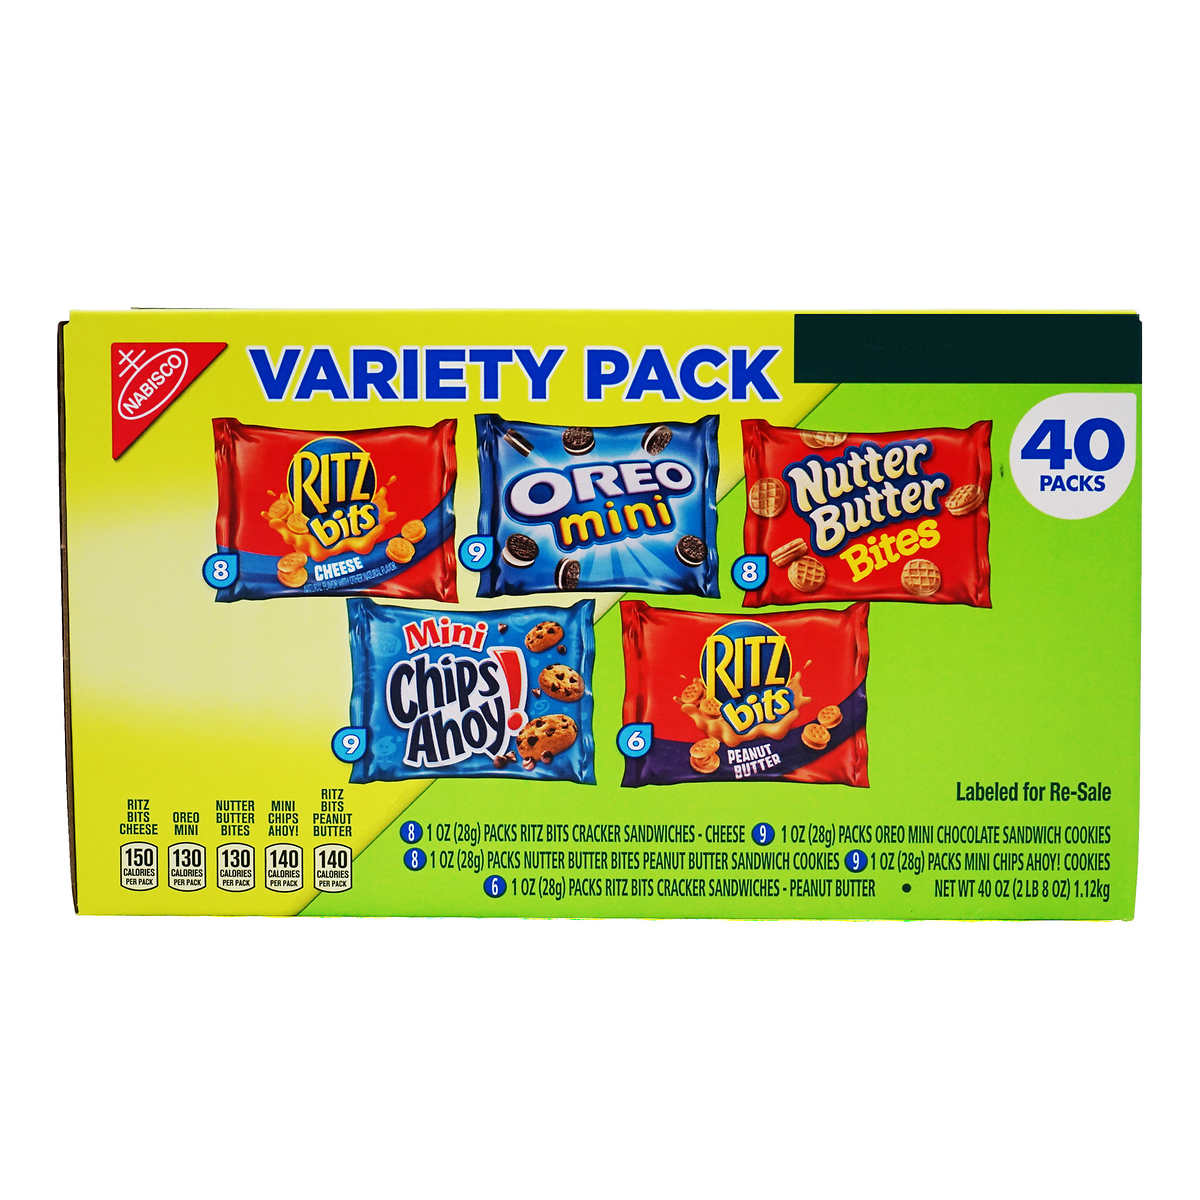 Clear PS Plastic Snack Packaging Box,Snack & Cookies & Candy